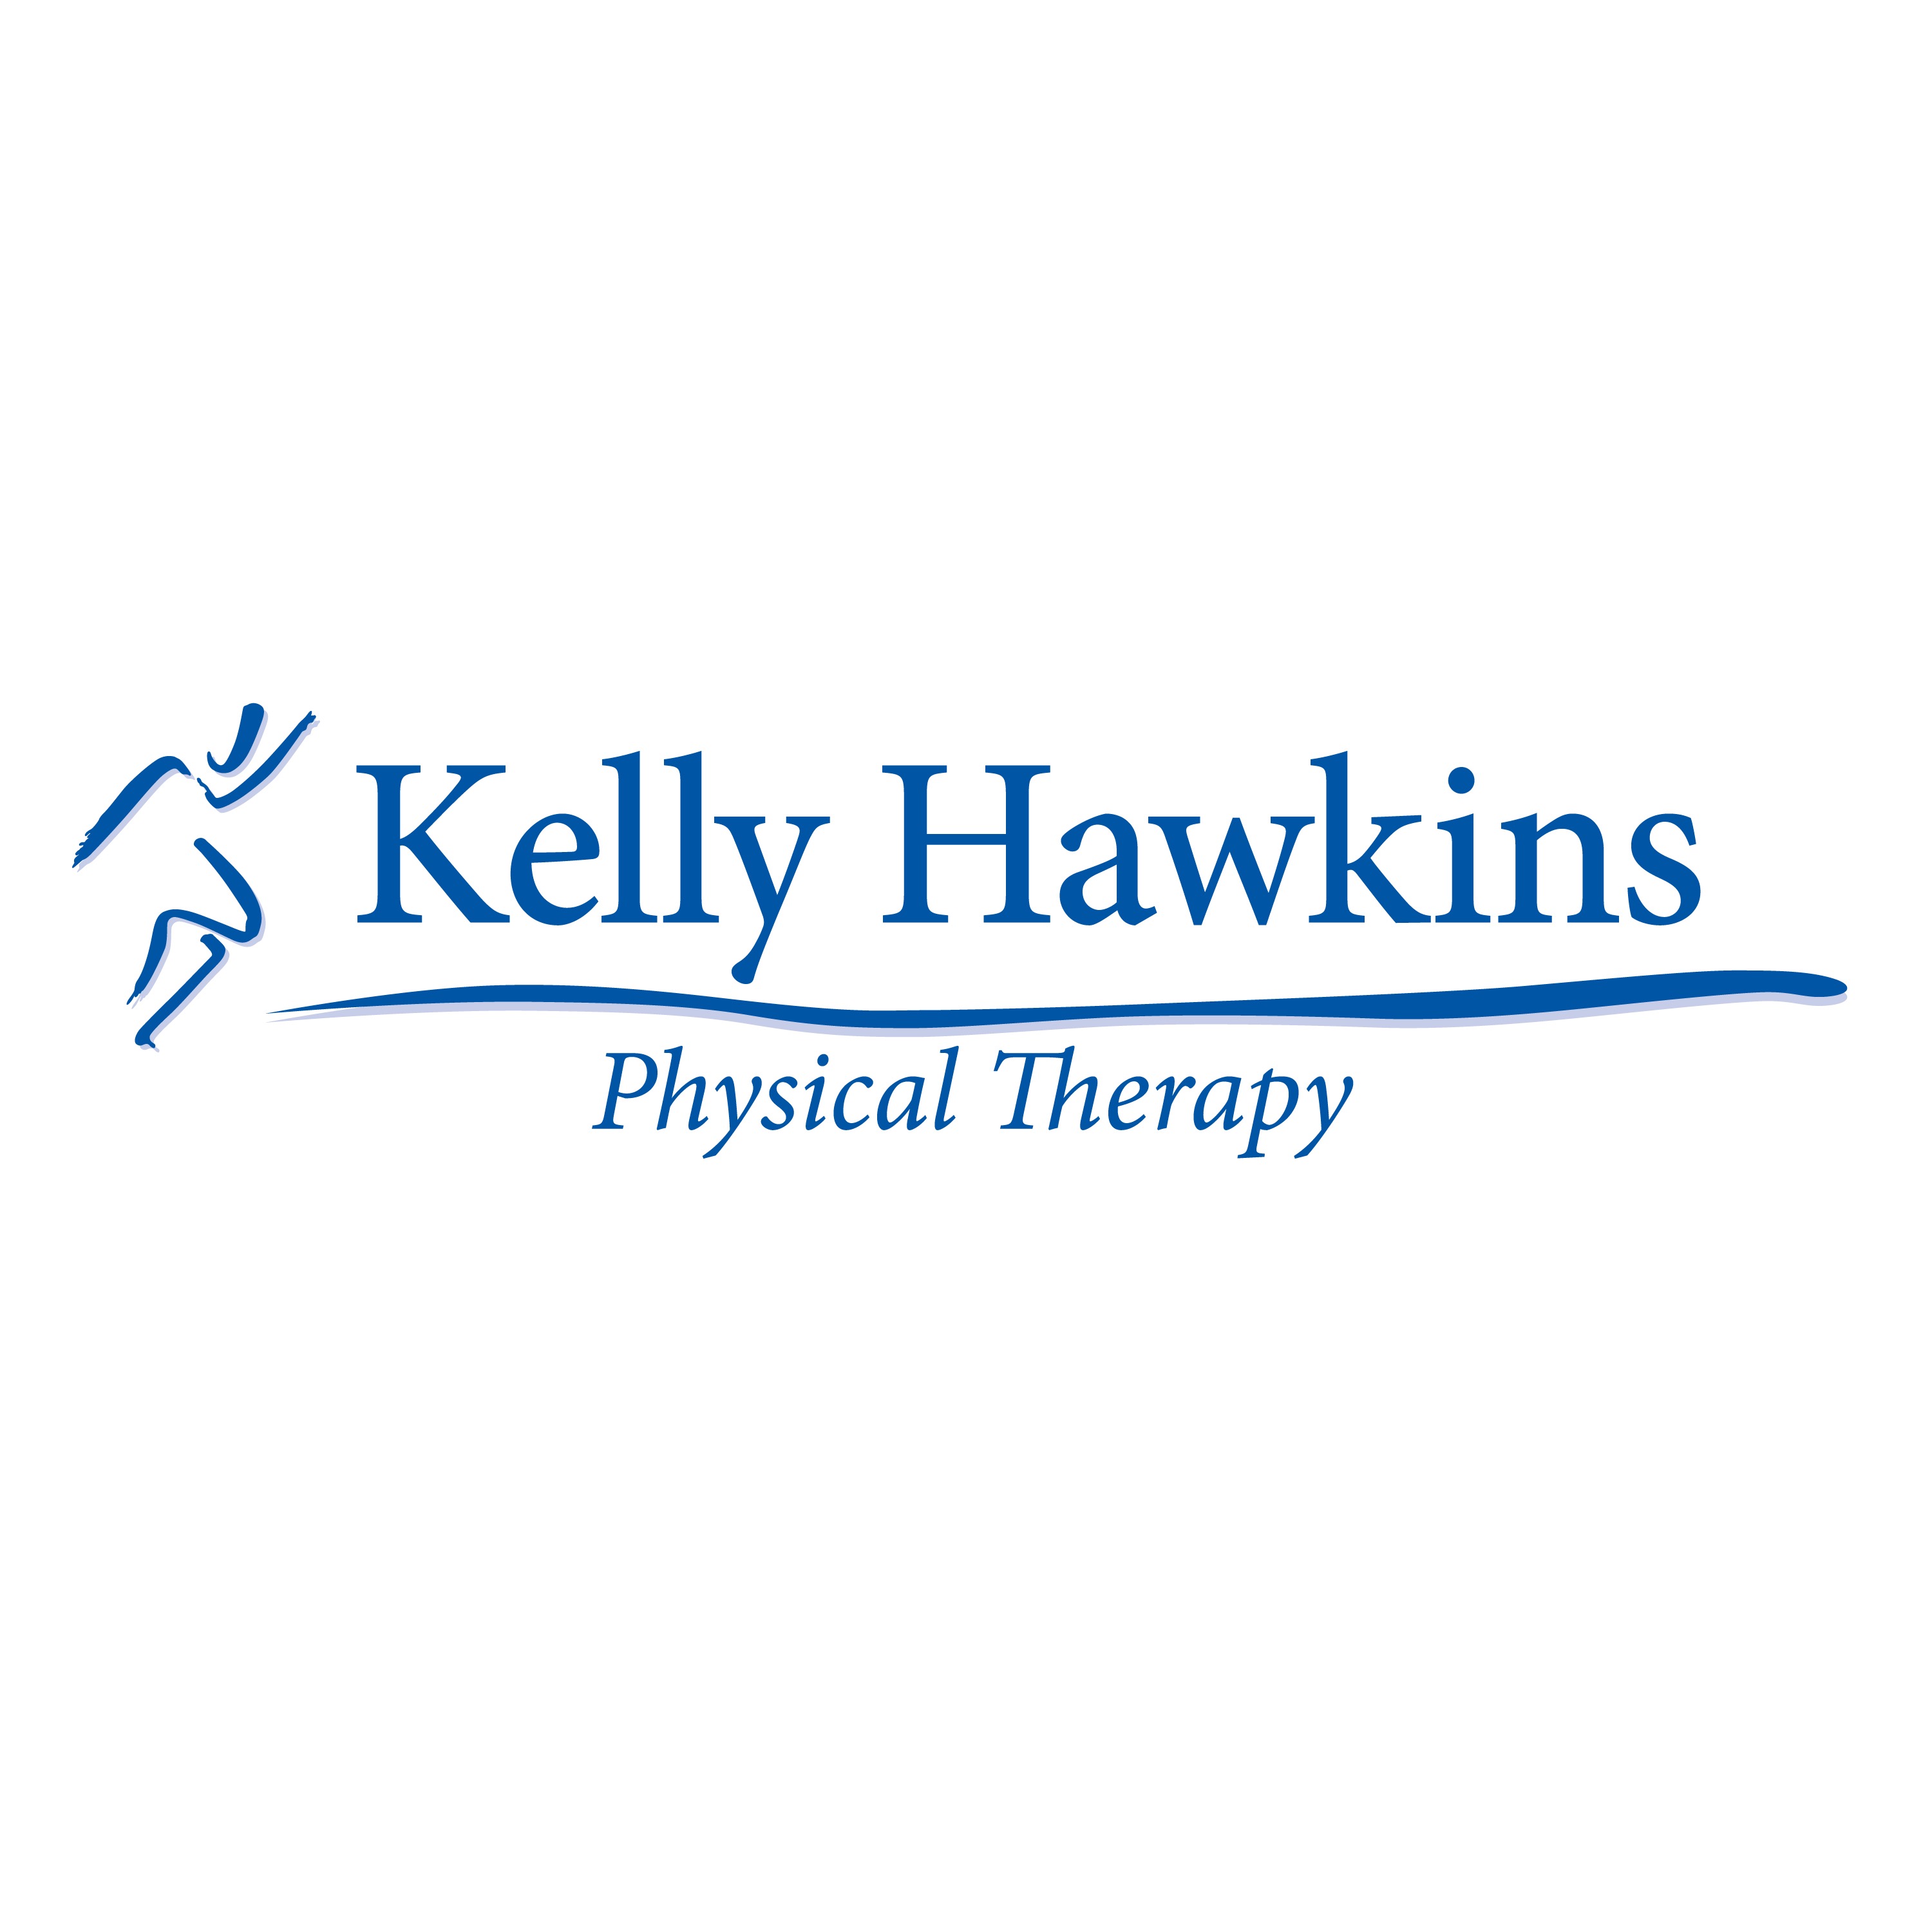 Kelly Hawkins Physical Therapy - Las Vegas, Nellis Blvd.